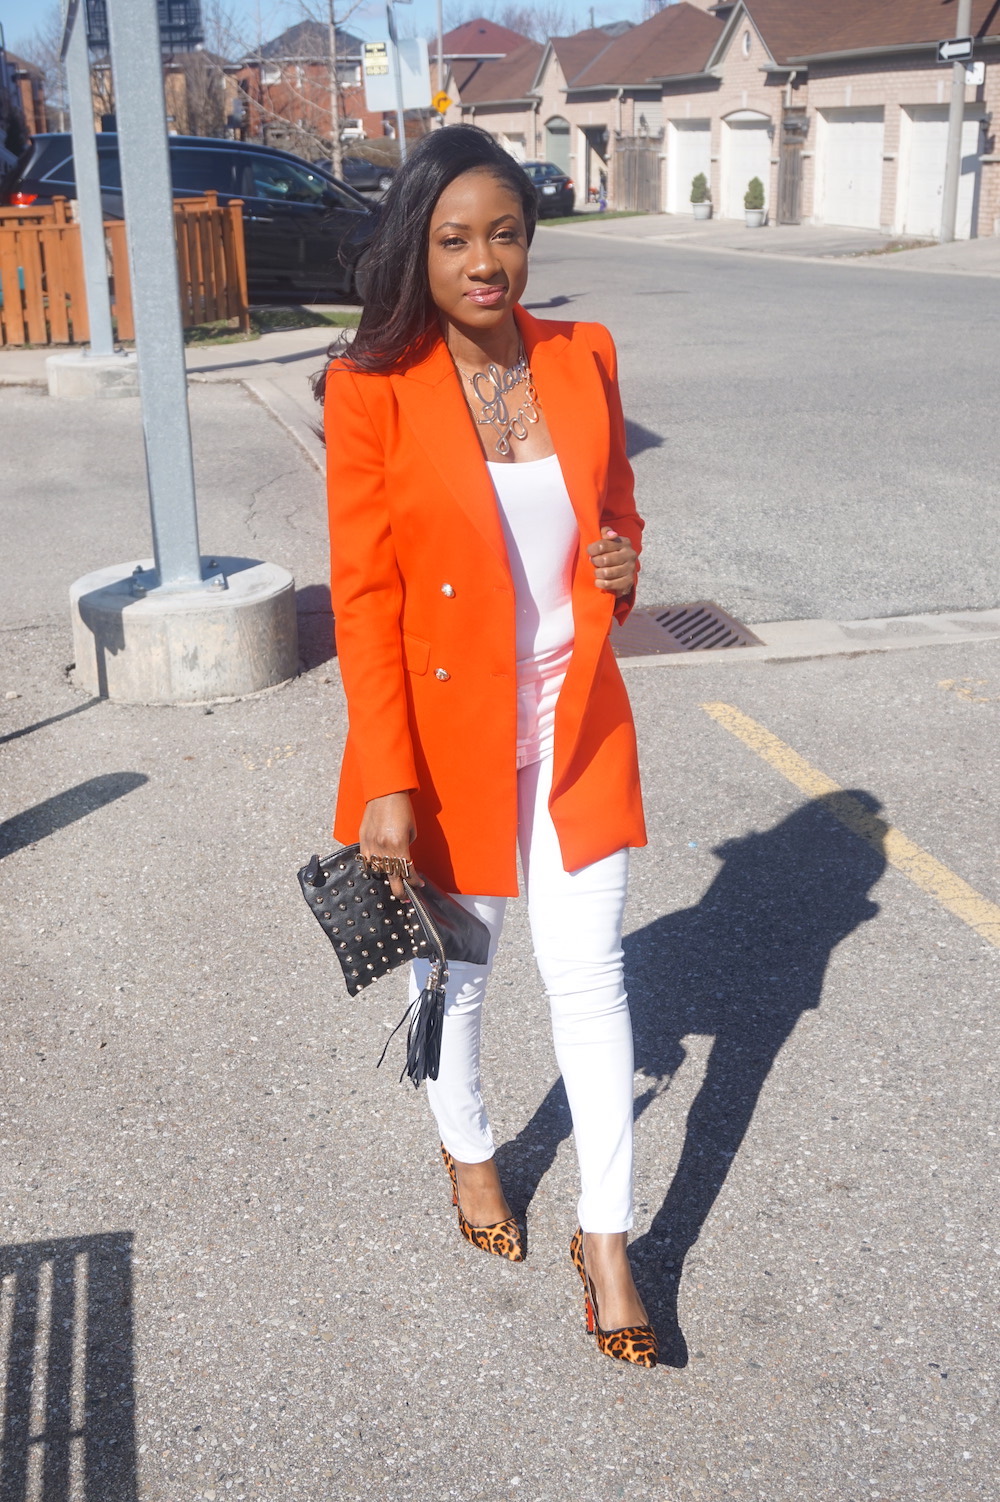 Fashion Bombshell of the Day: Lillian from Toronto